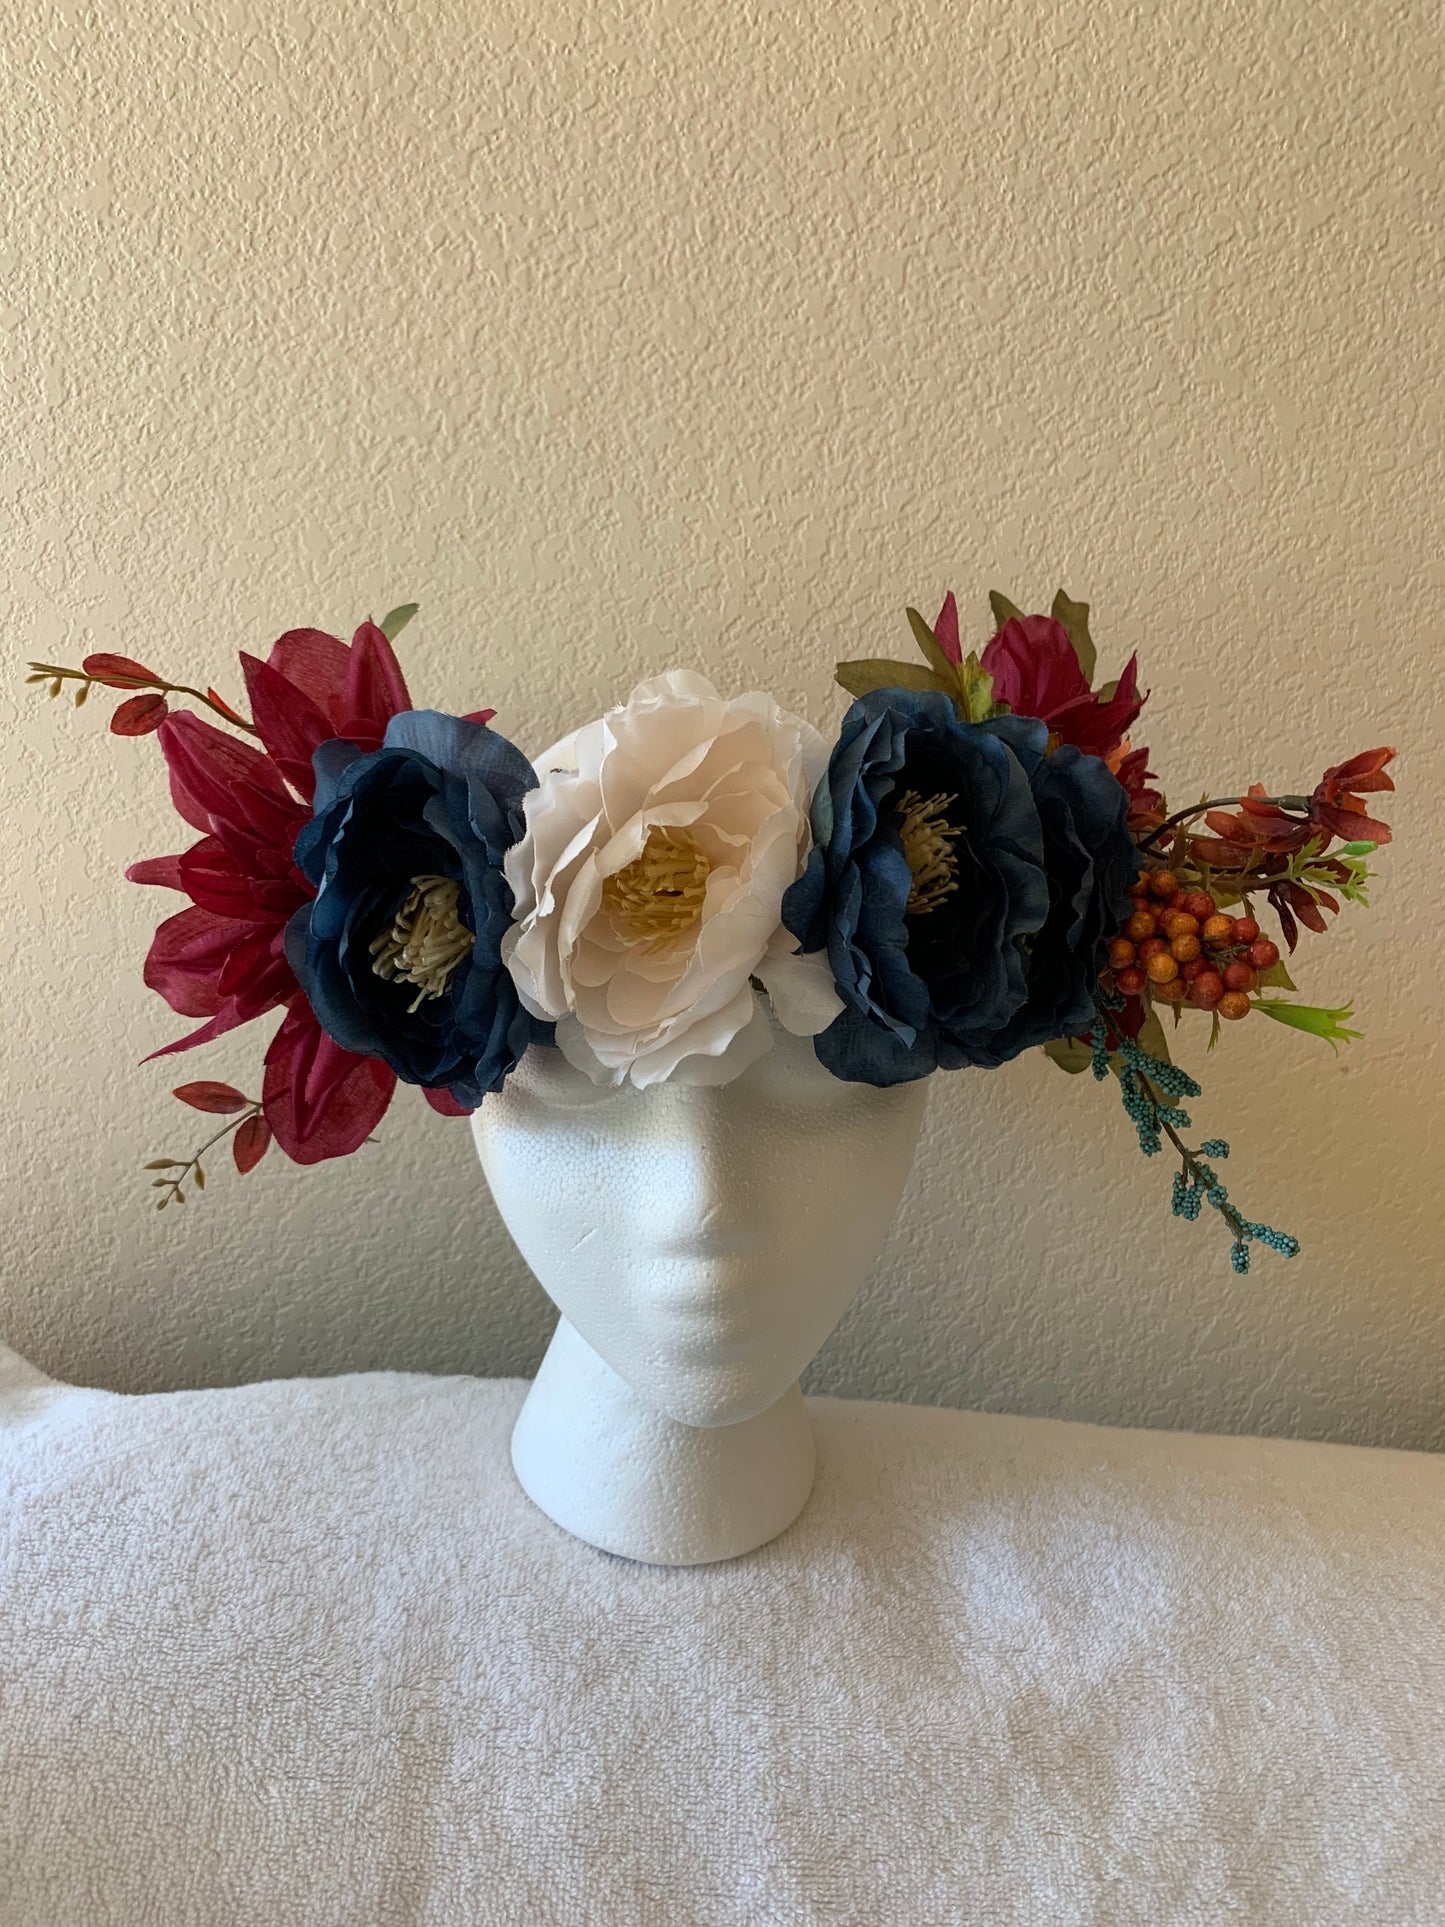 Large Wreath - Burgundy, Dusty Blue, and Off White Flowers